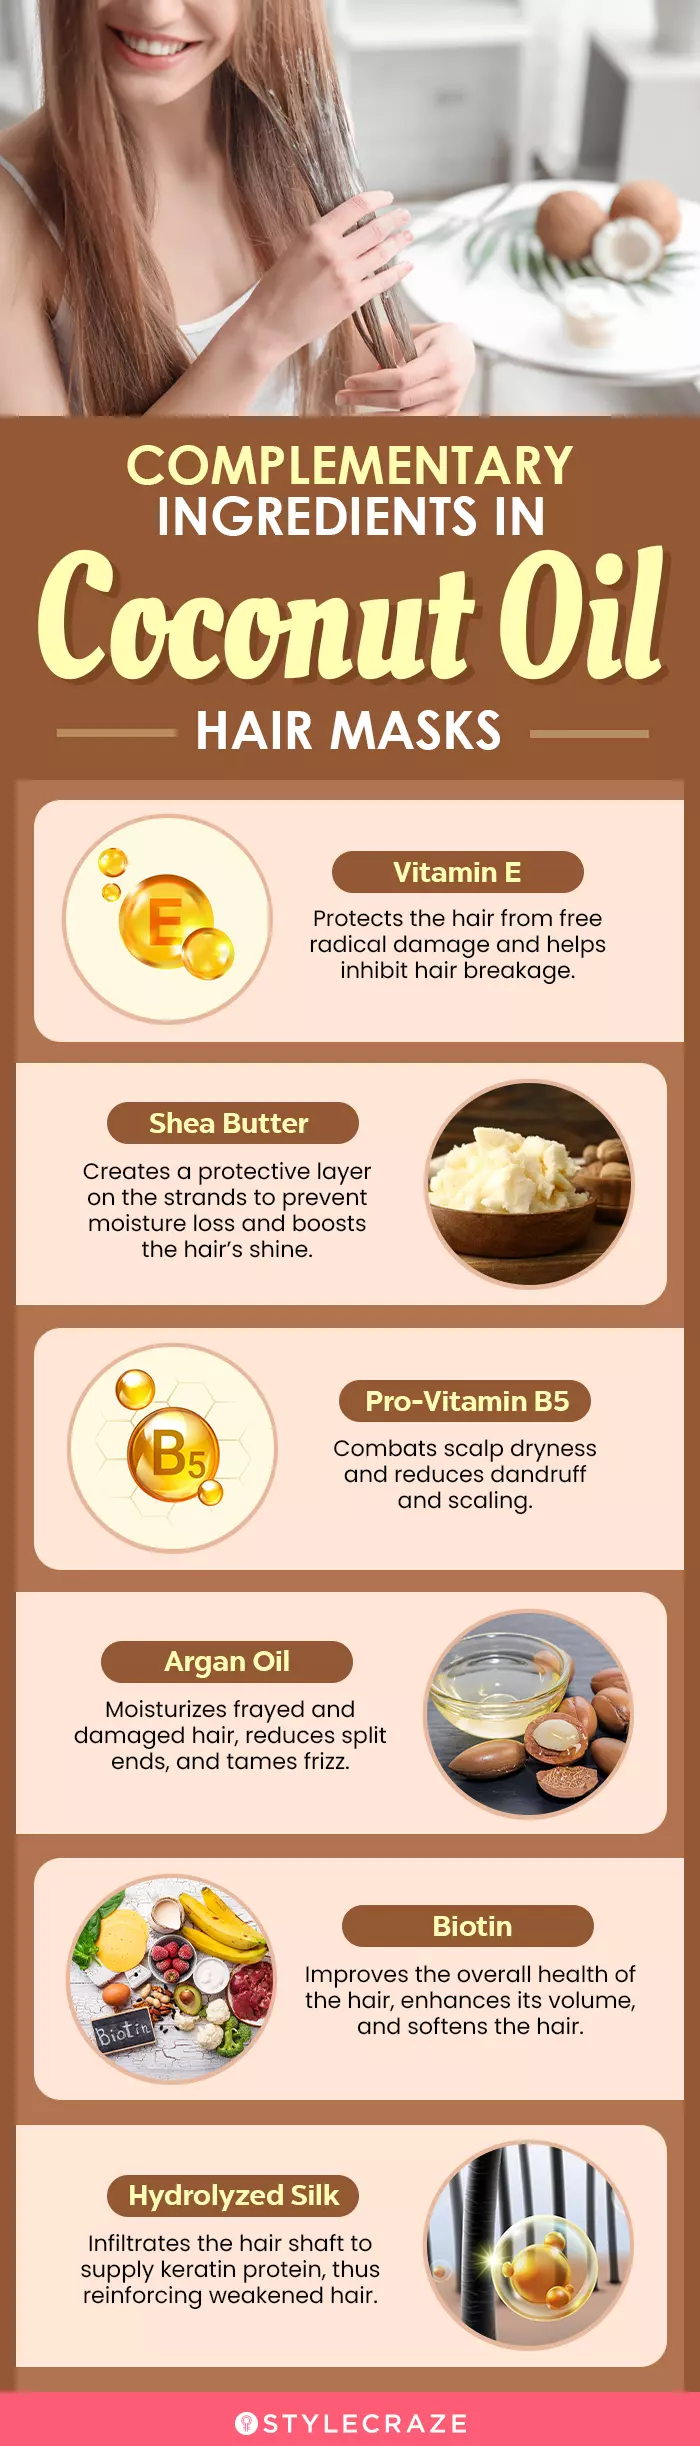 Complementary Ingredients In Coconut Oil Hair Masks (infographic)